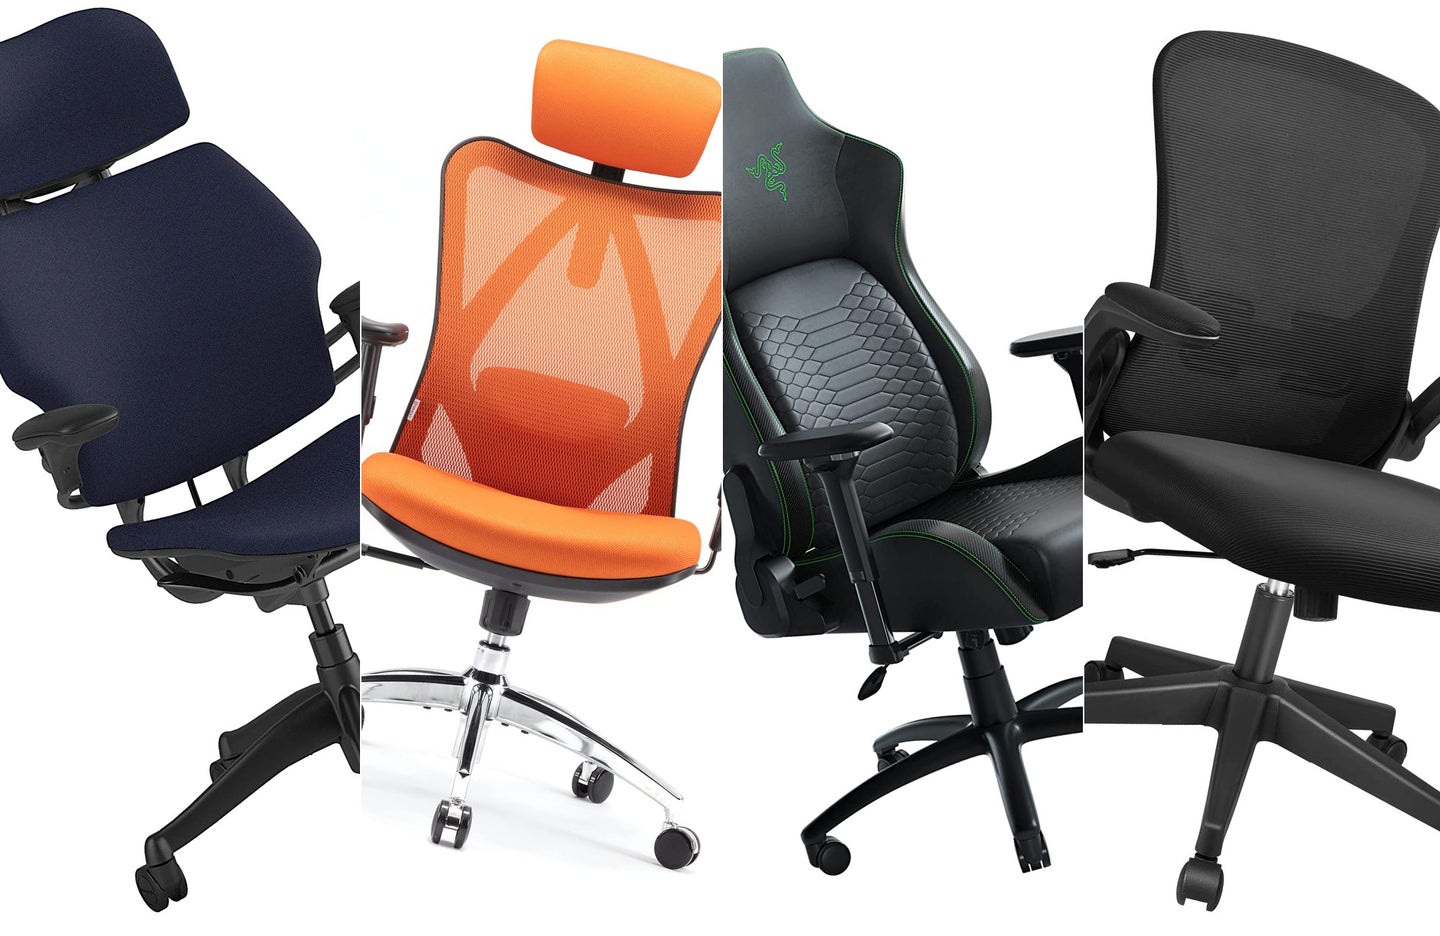 The best chairs for lumbar support composited